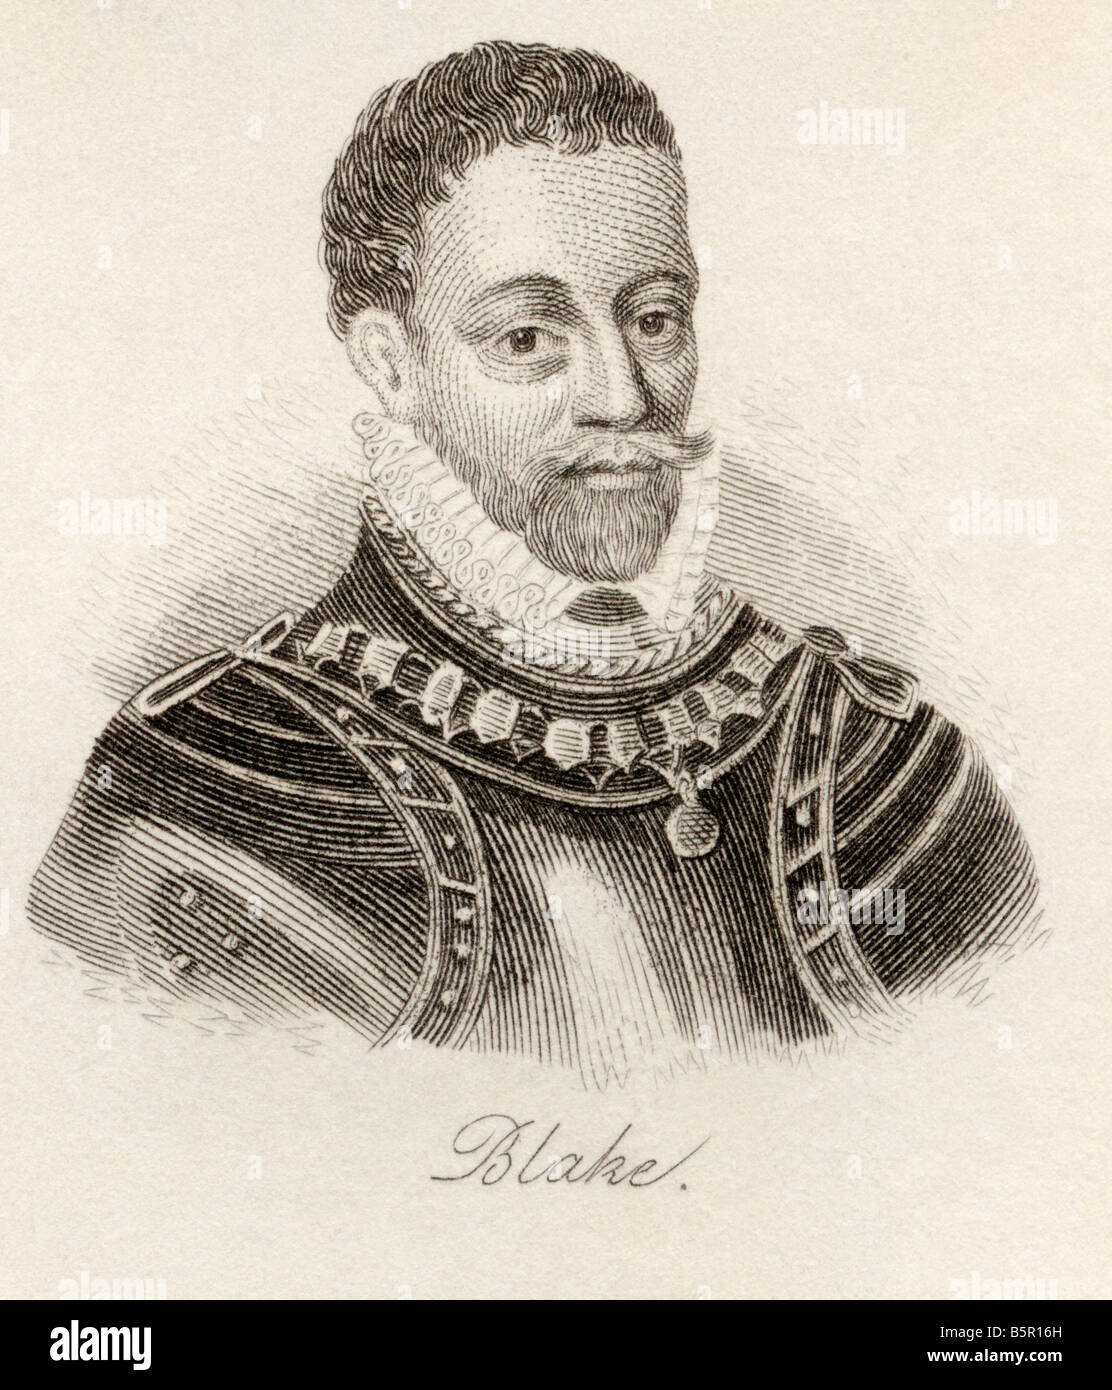 Robert Blake, 1599 -1657. English naval commander and Admiral. From the book Crabb's Historical Dictionary, published 1825. Stock Photo